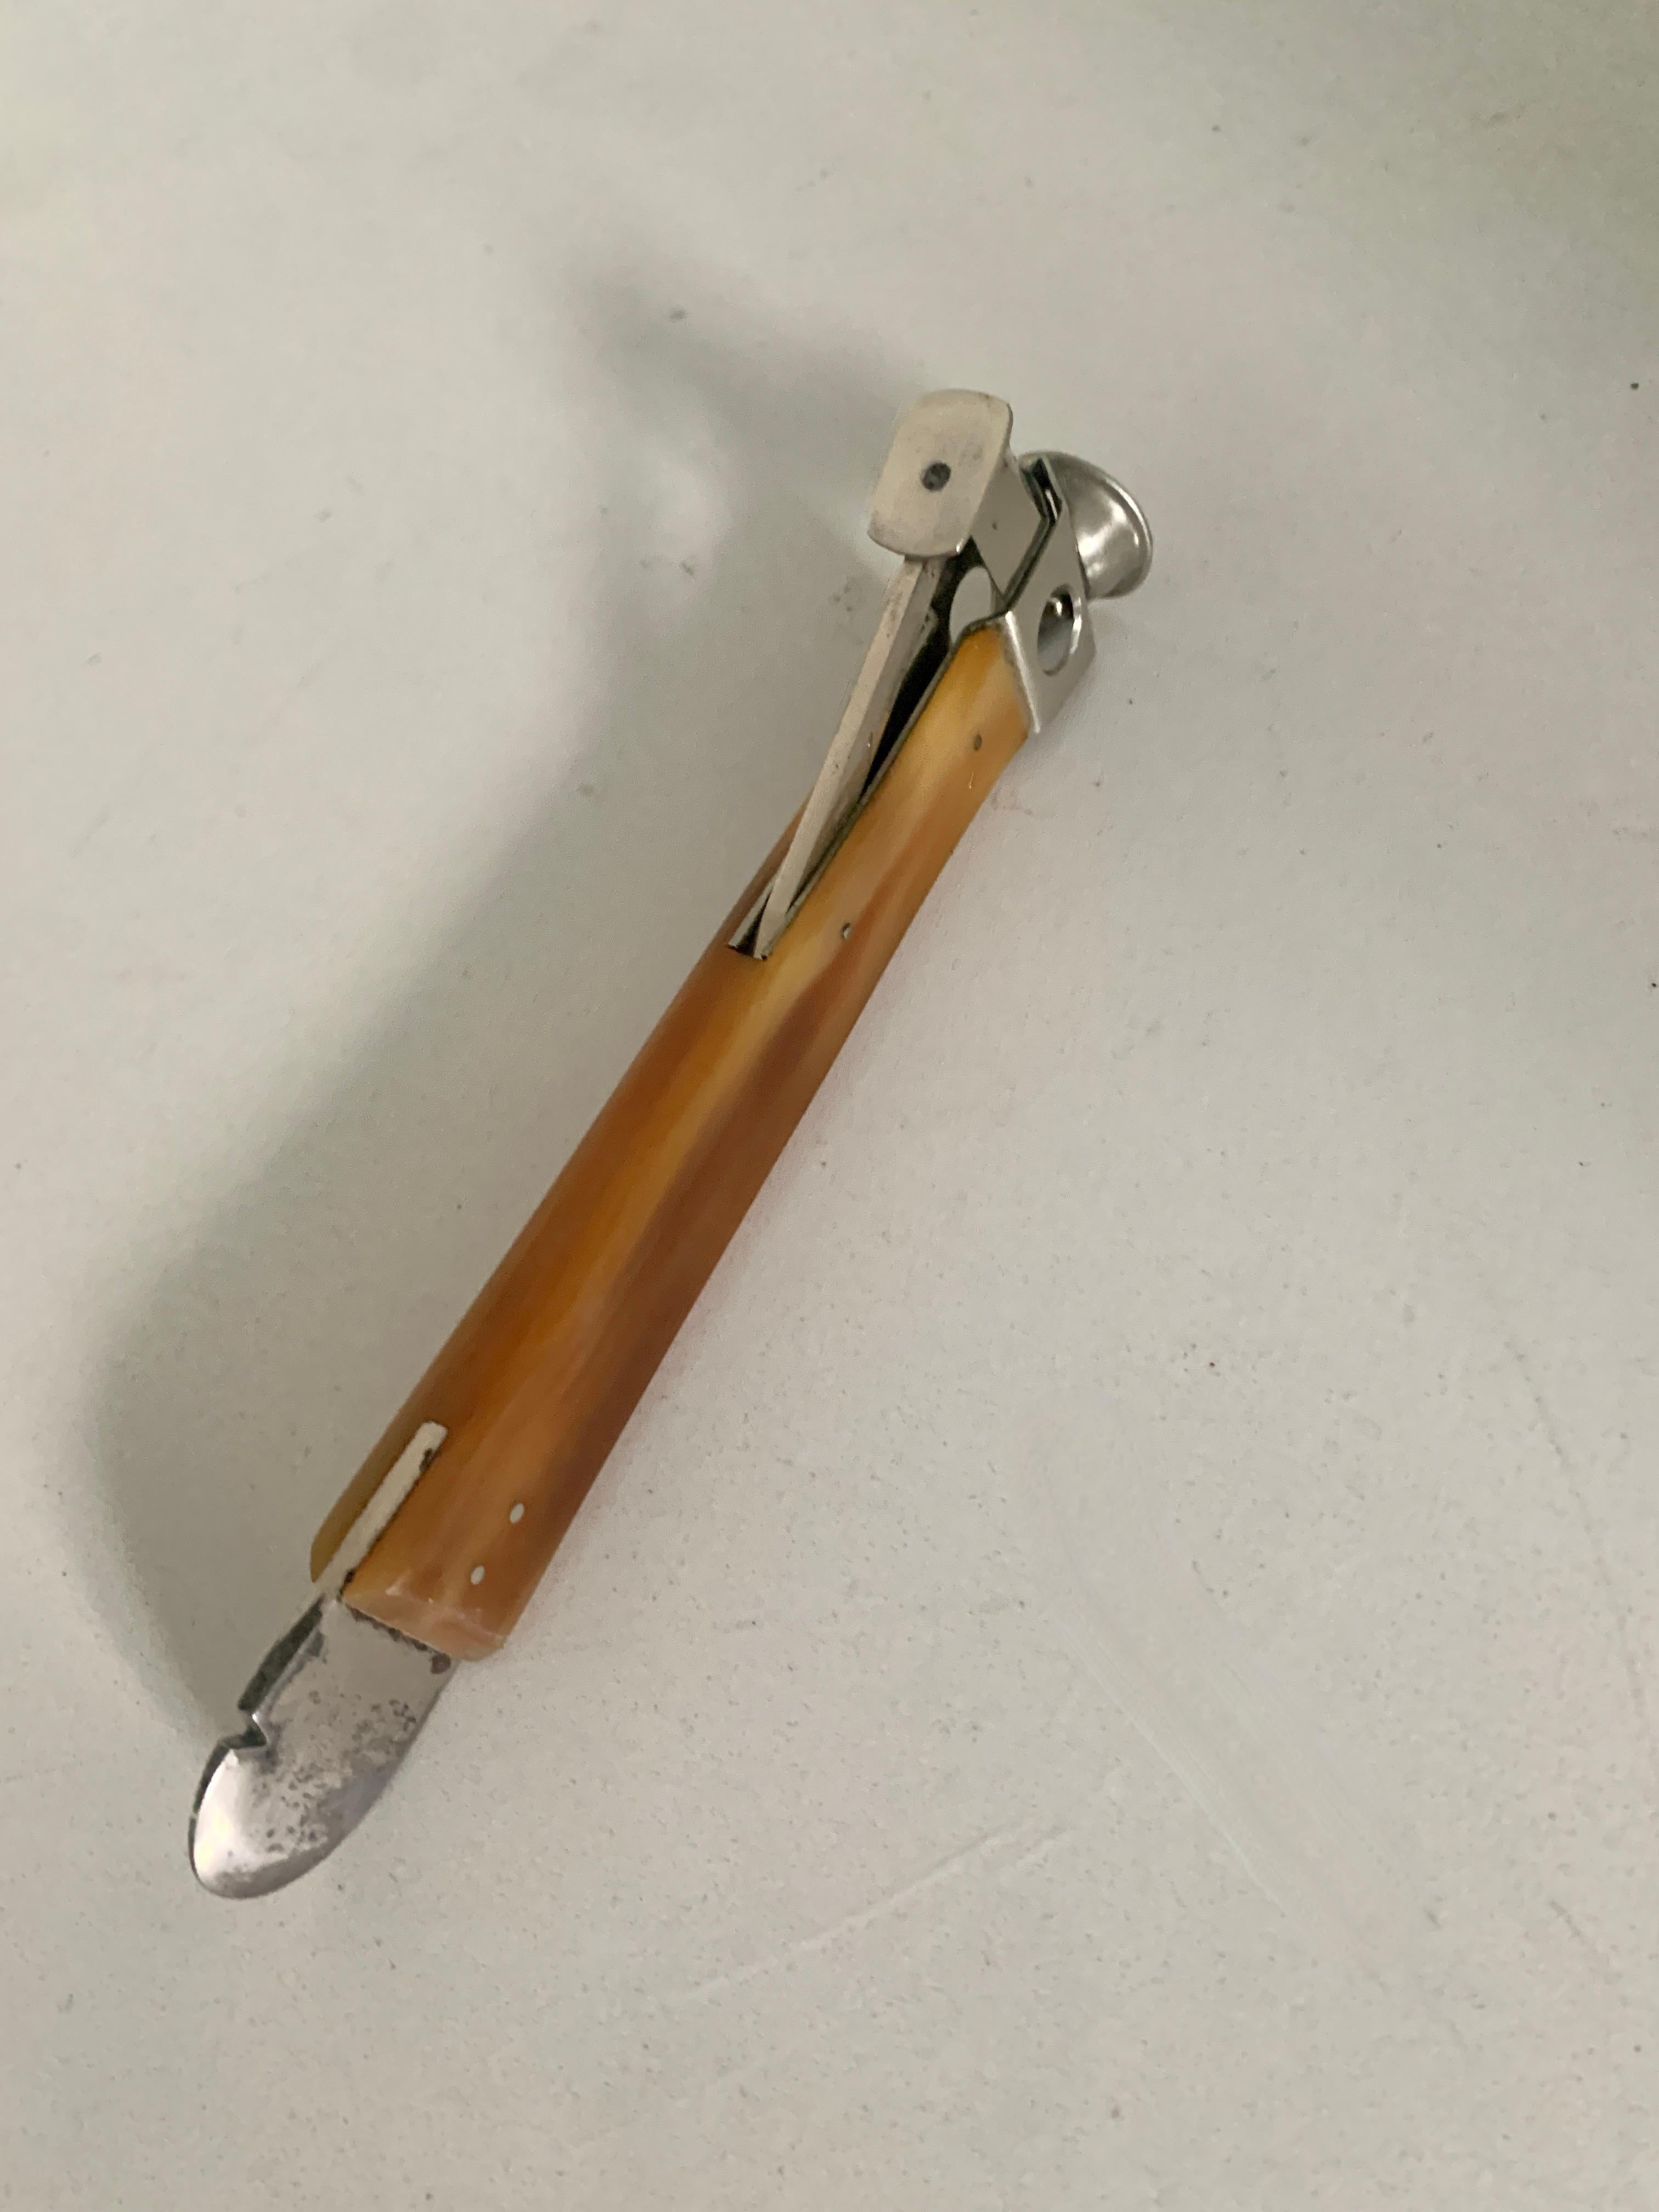 Donatus Solingen German cigar cutter with bone handle and box opener for the smaller cigar. This vintage piece has a bone handle and stainless metal opening allows for a 3/8